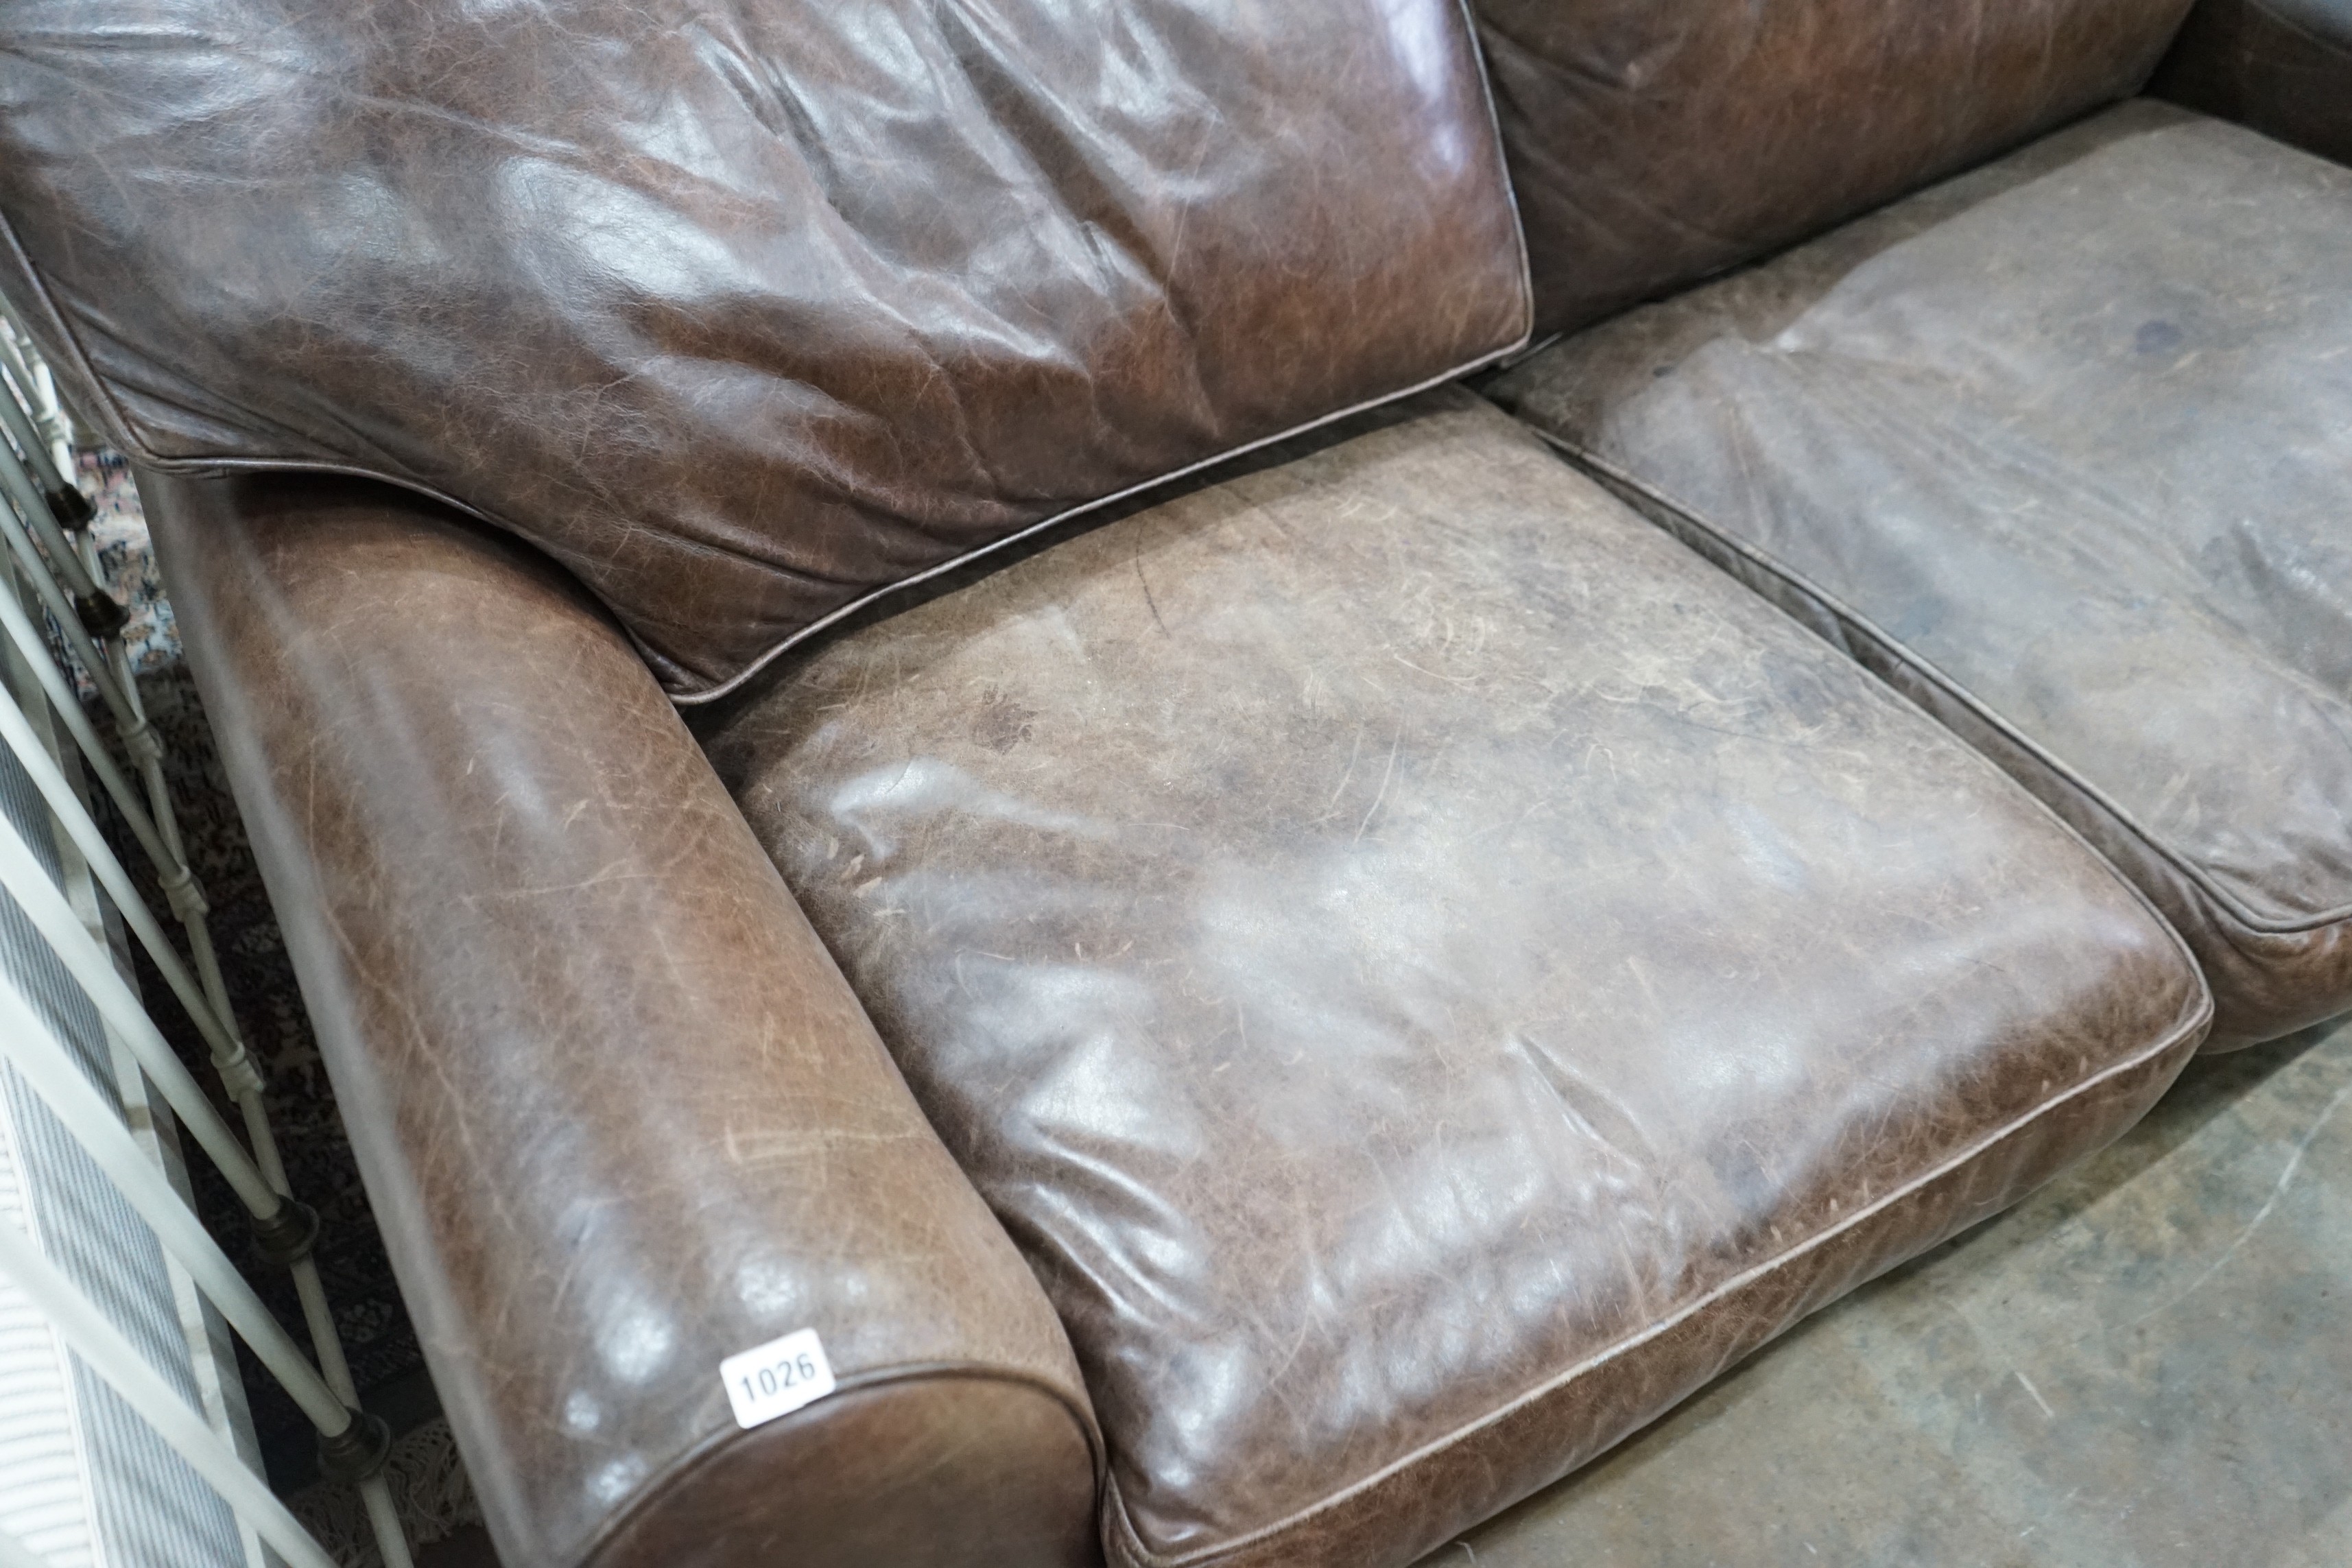 A Laura Ashley brown leather sofa bed, width 170cm, depth 96cm, height 86cm